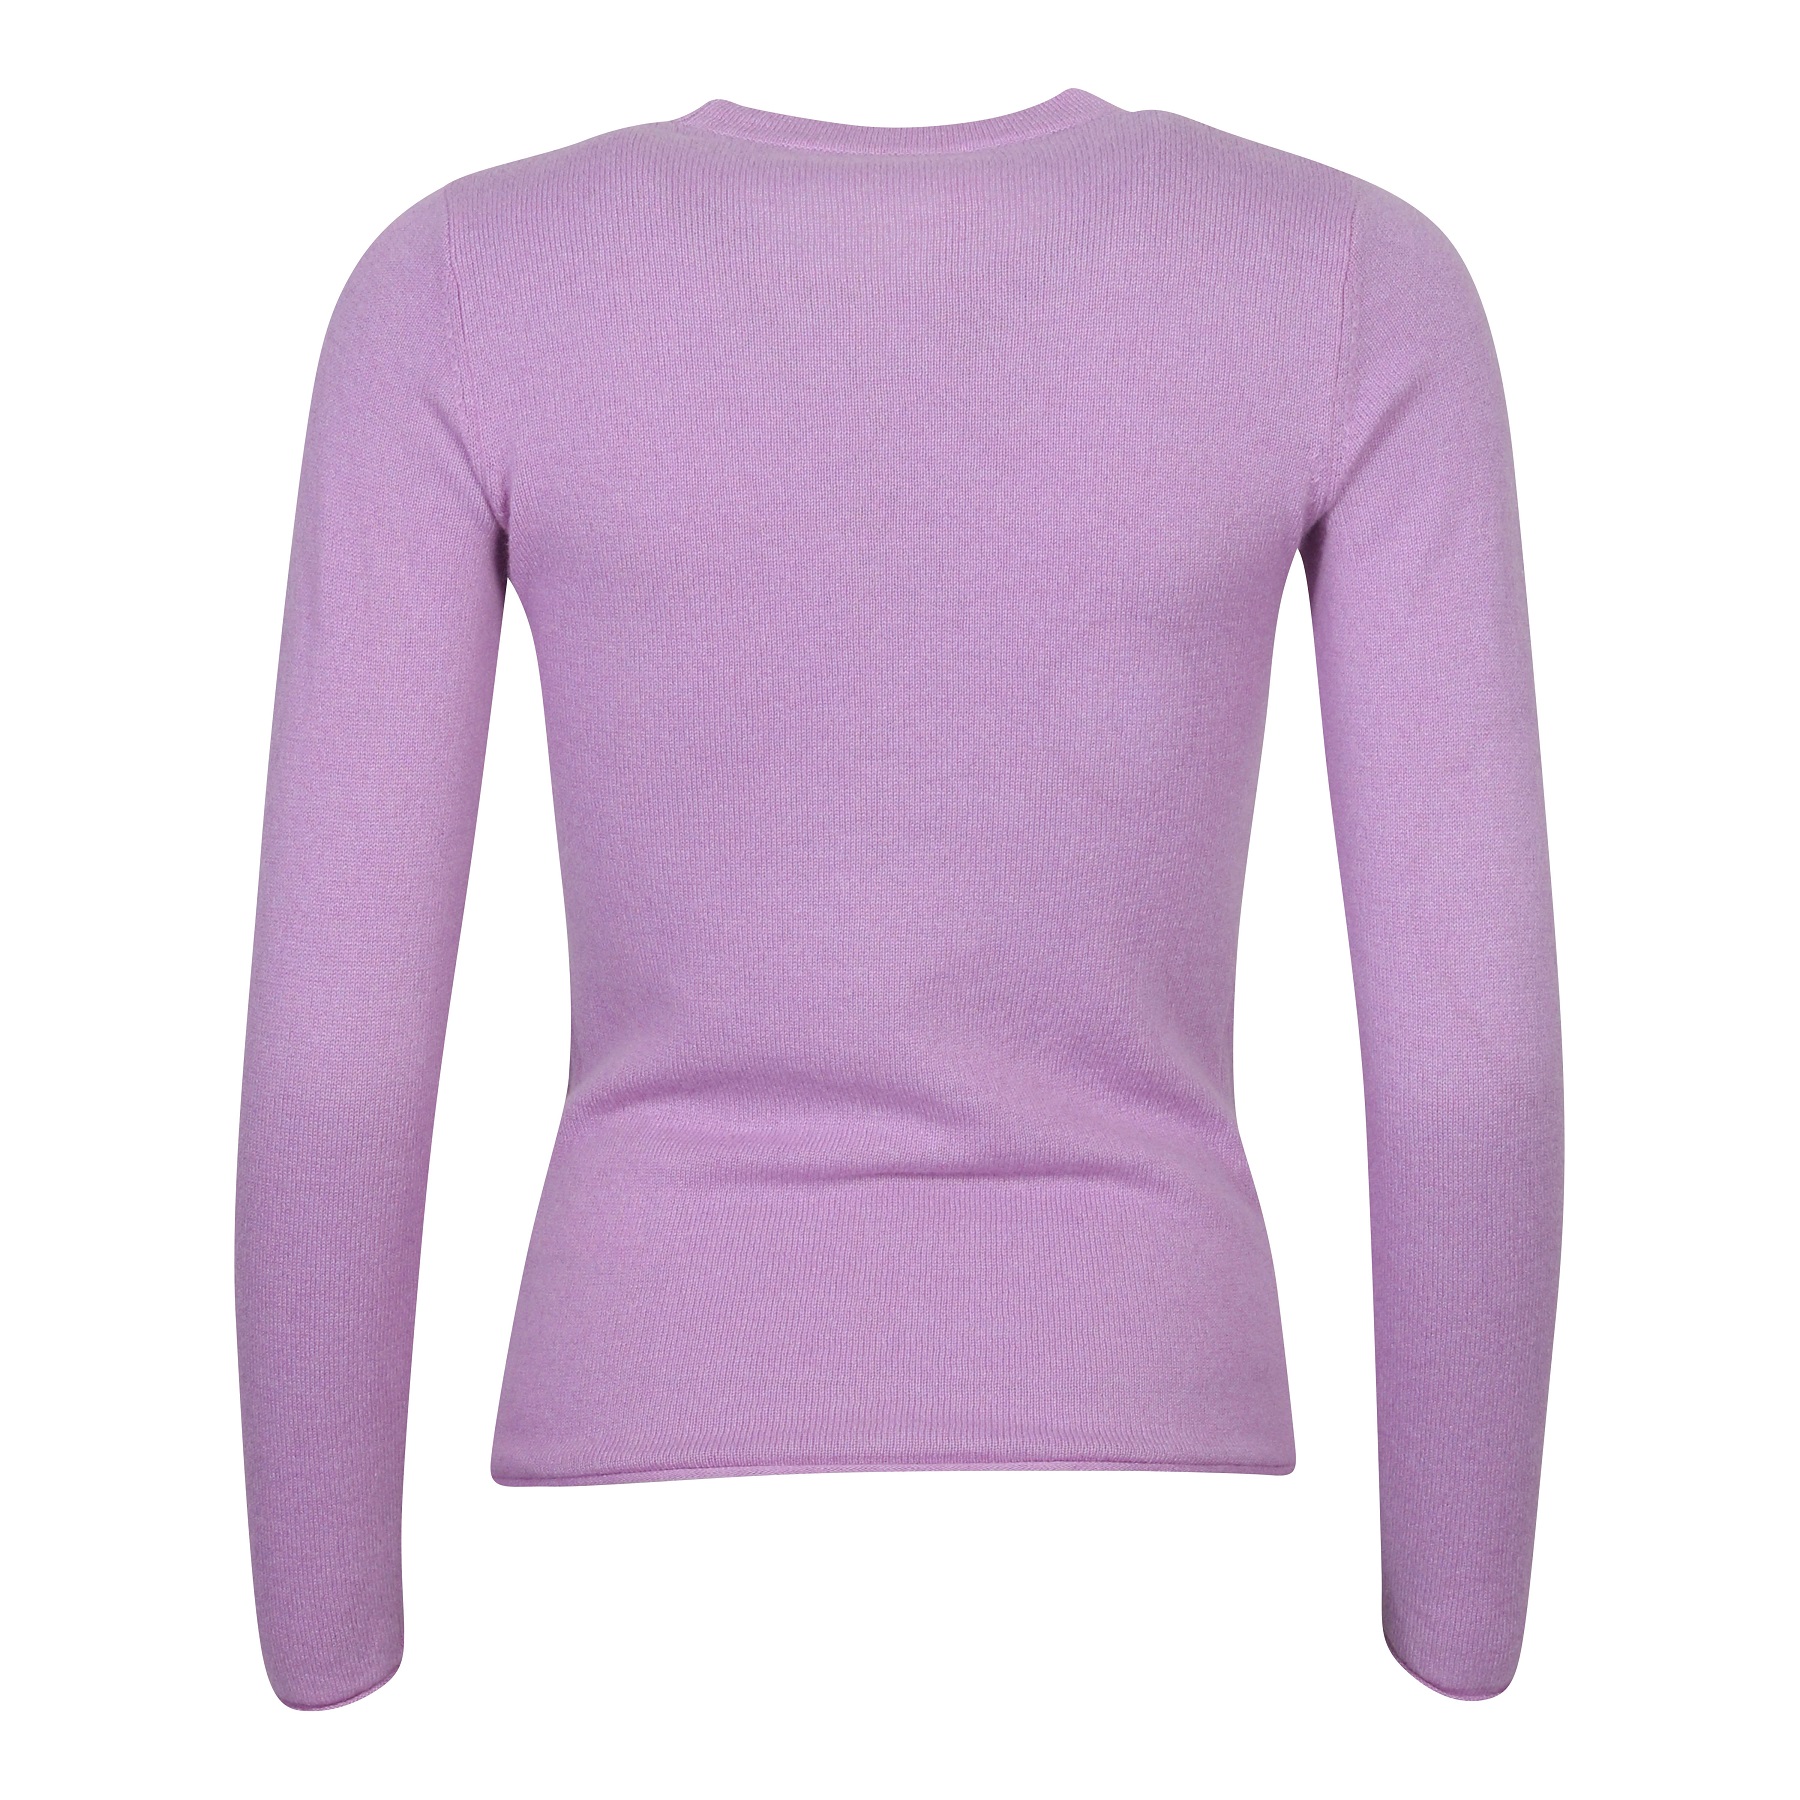 Absolut Cashmere Fitted Pullover in Lilac M